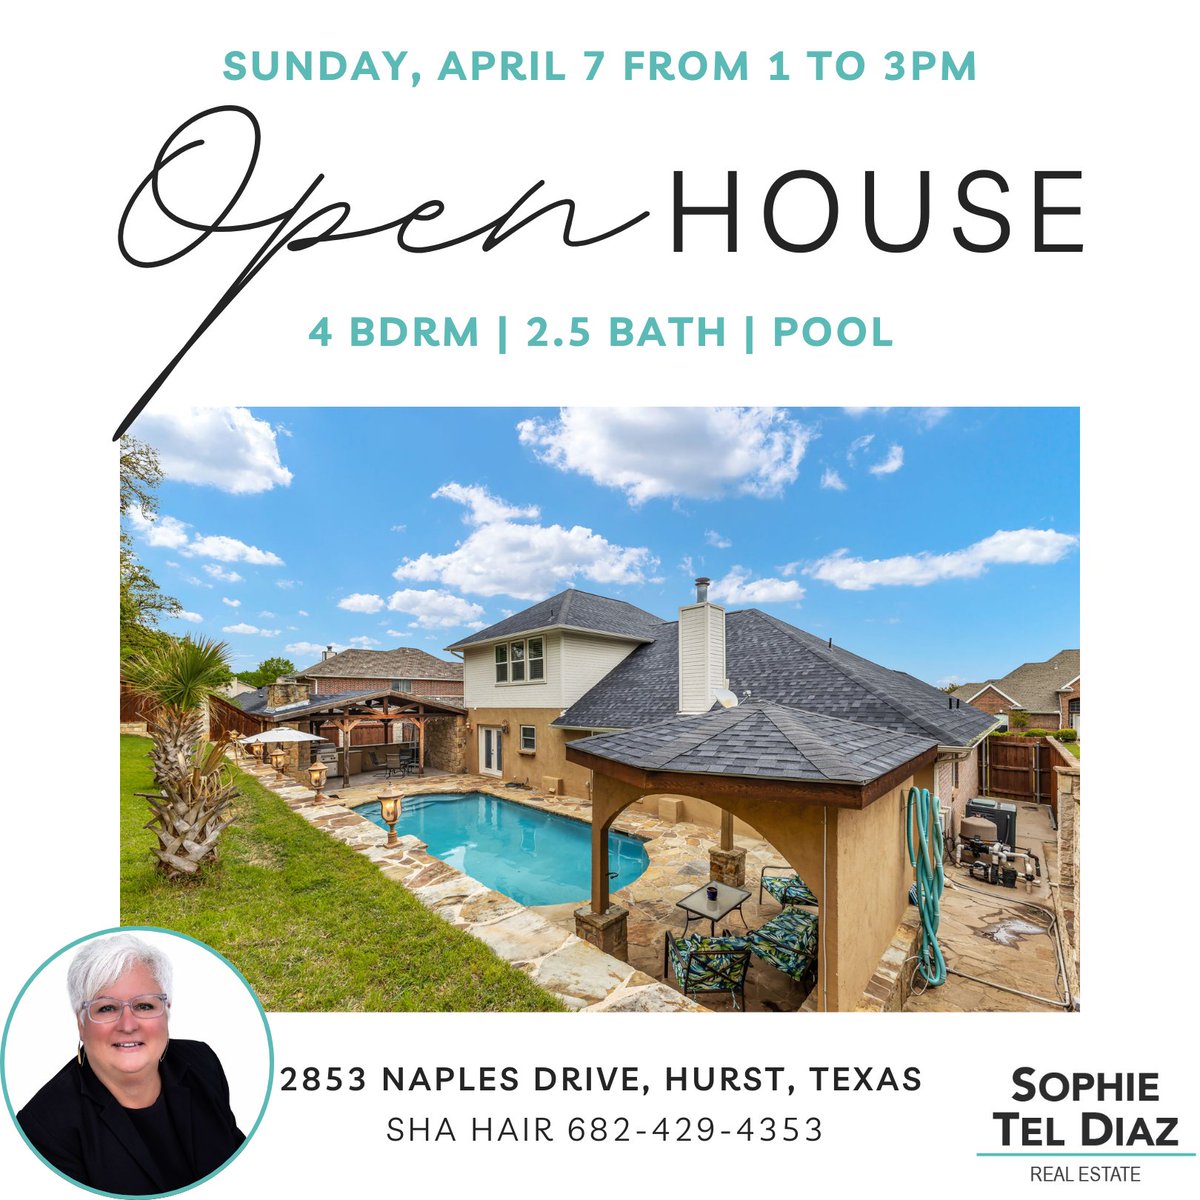 Open House - Sunday, April 7 from 1 to 3PM
📍2853 Naples Drive, Hurst, Texas
4 Bedroom, 2.5 Bathroom, Pool
📱Call or Text Sha at 682-429-4353
#justlisted🏡 #openhouse #dfwrealestate #texasrealestate #hurst #hursttx #shahairrealtor #shasellsrealestate #dfwrealtor #pool